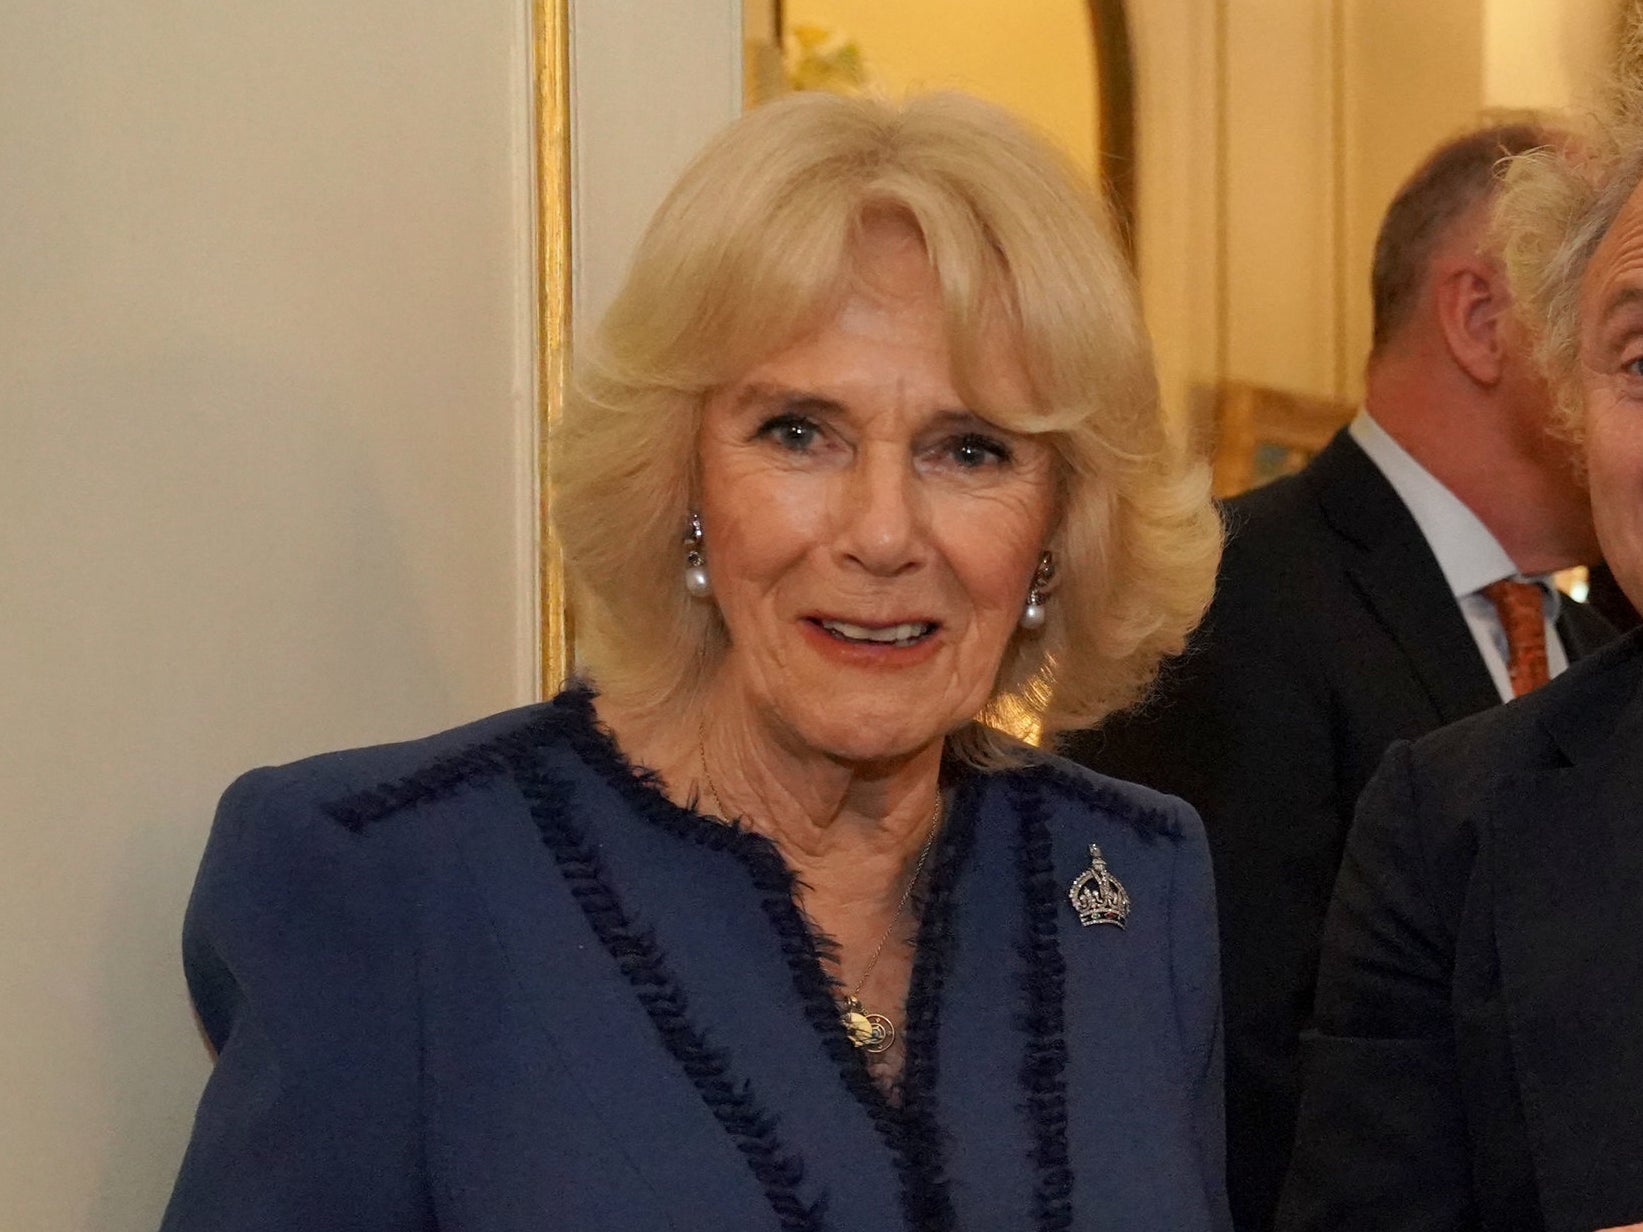 Camilla told authors: ‘Let there be no squeaking like mice’